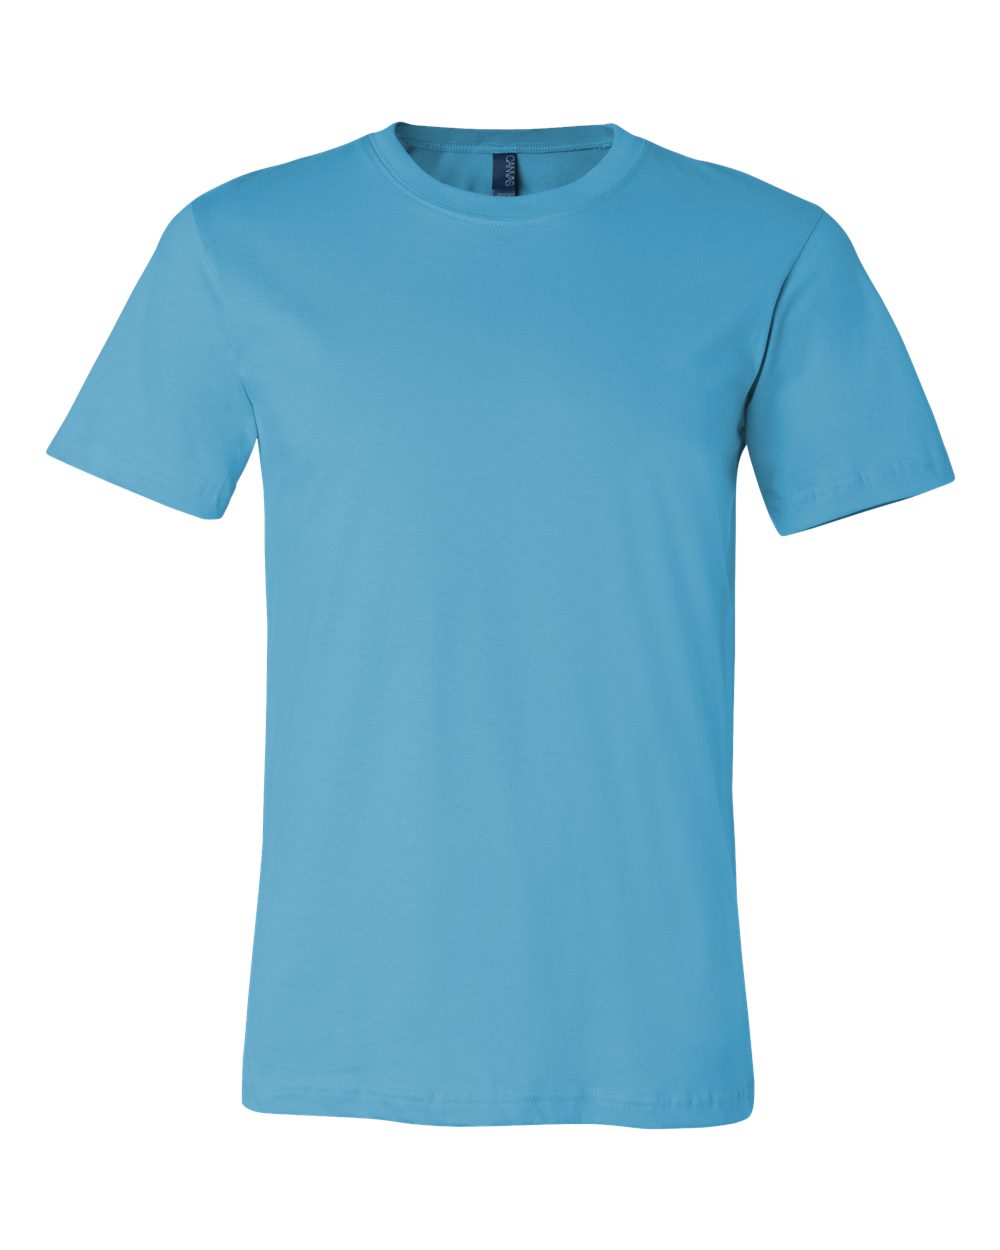 Bella + Canvas Cotton Tee (3001) in Turquoise